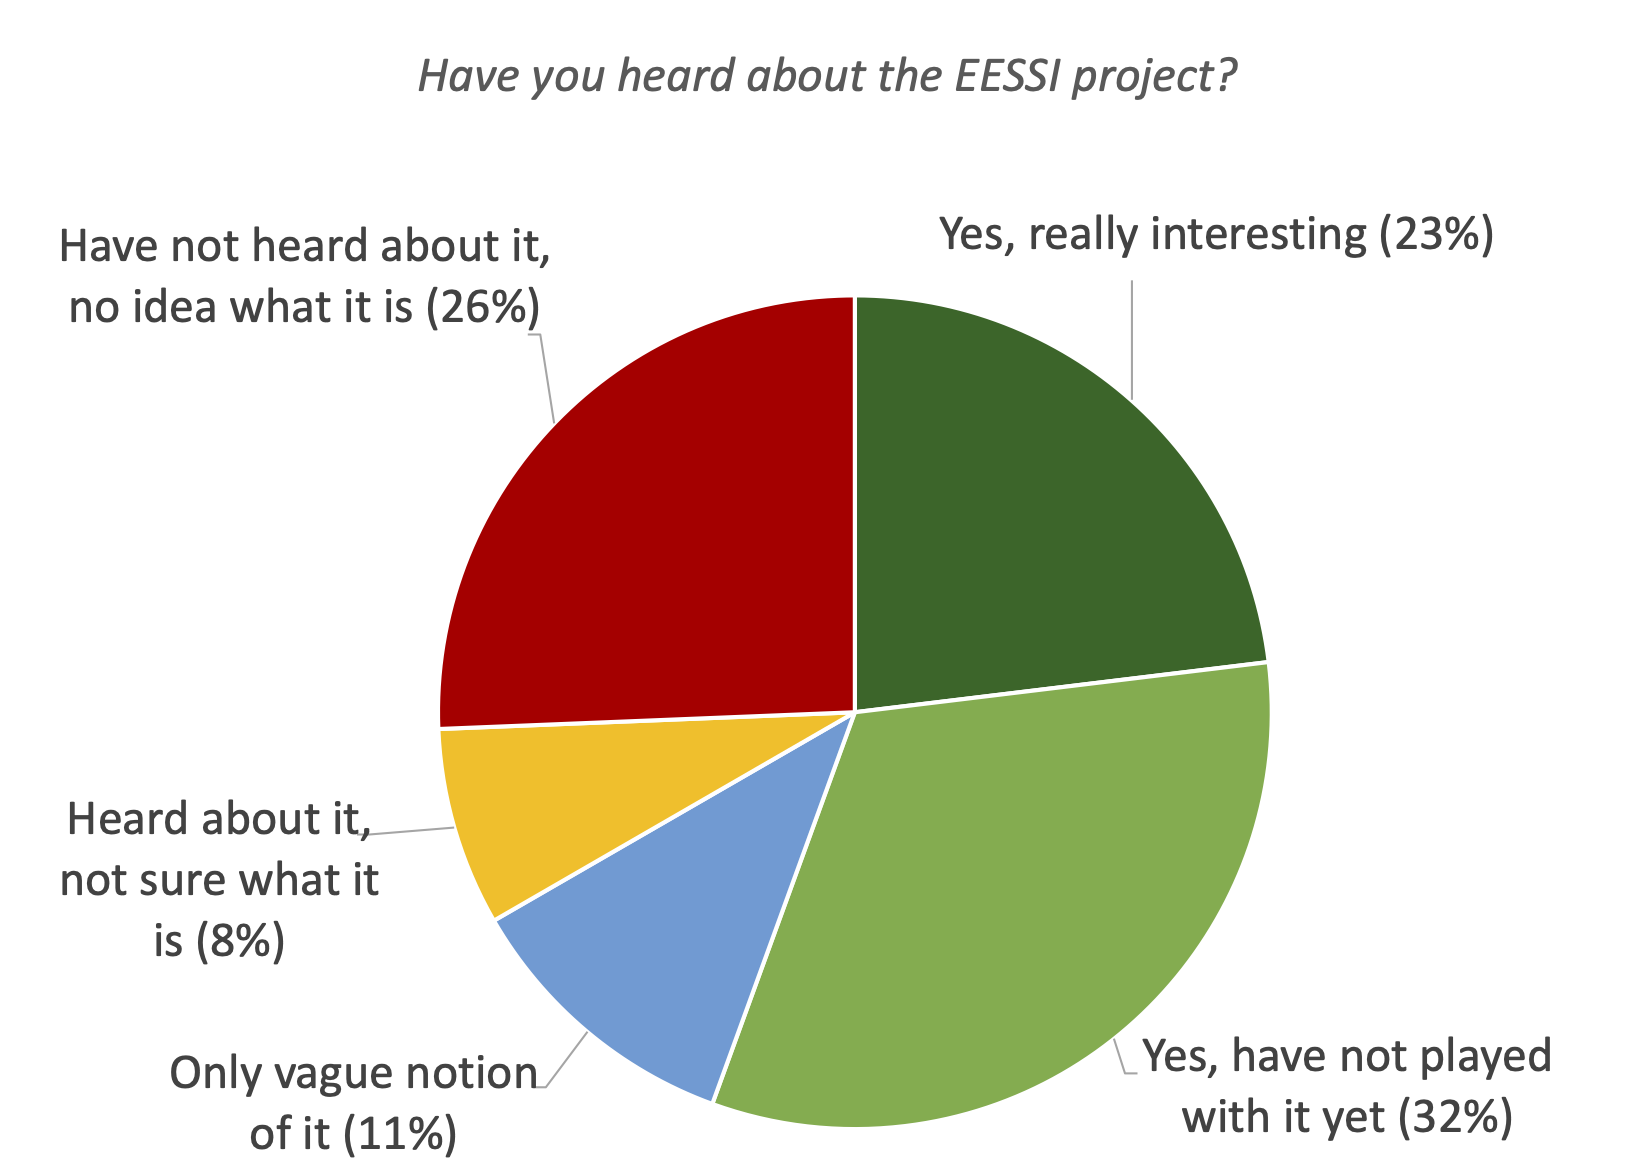 48. Have you heard about the EESSI project?